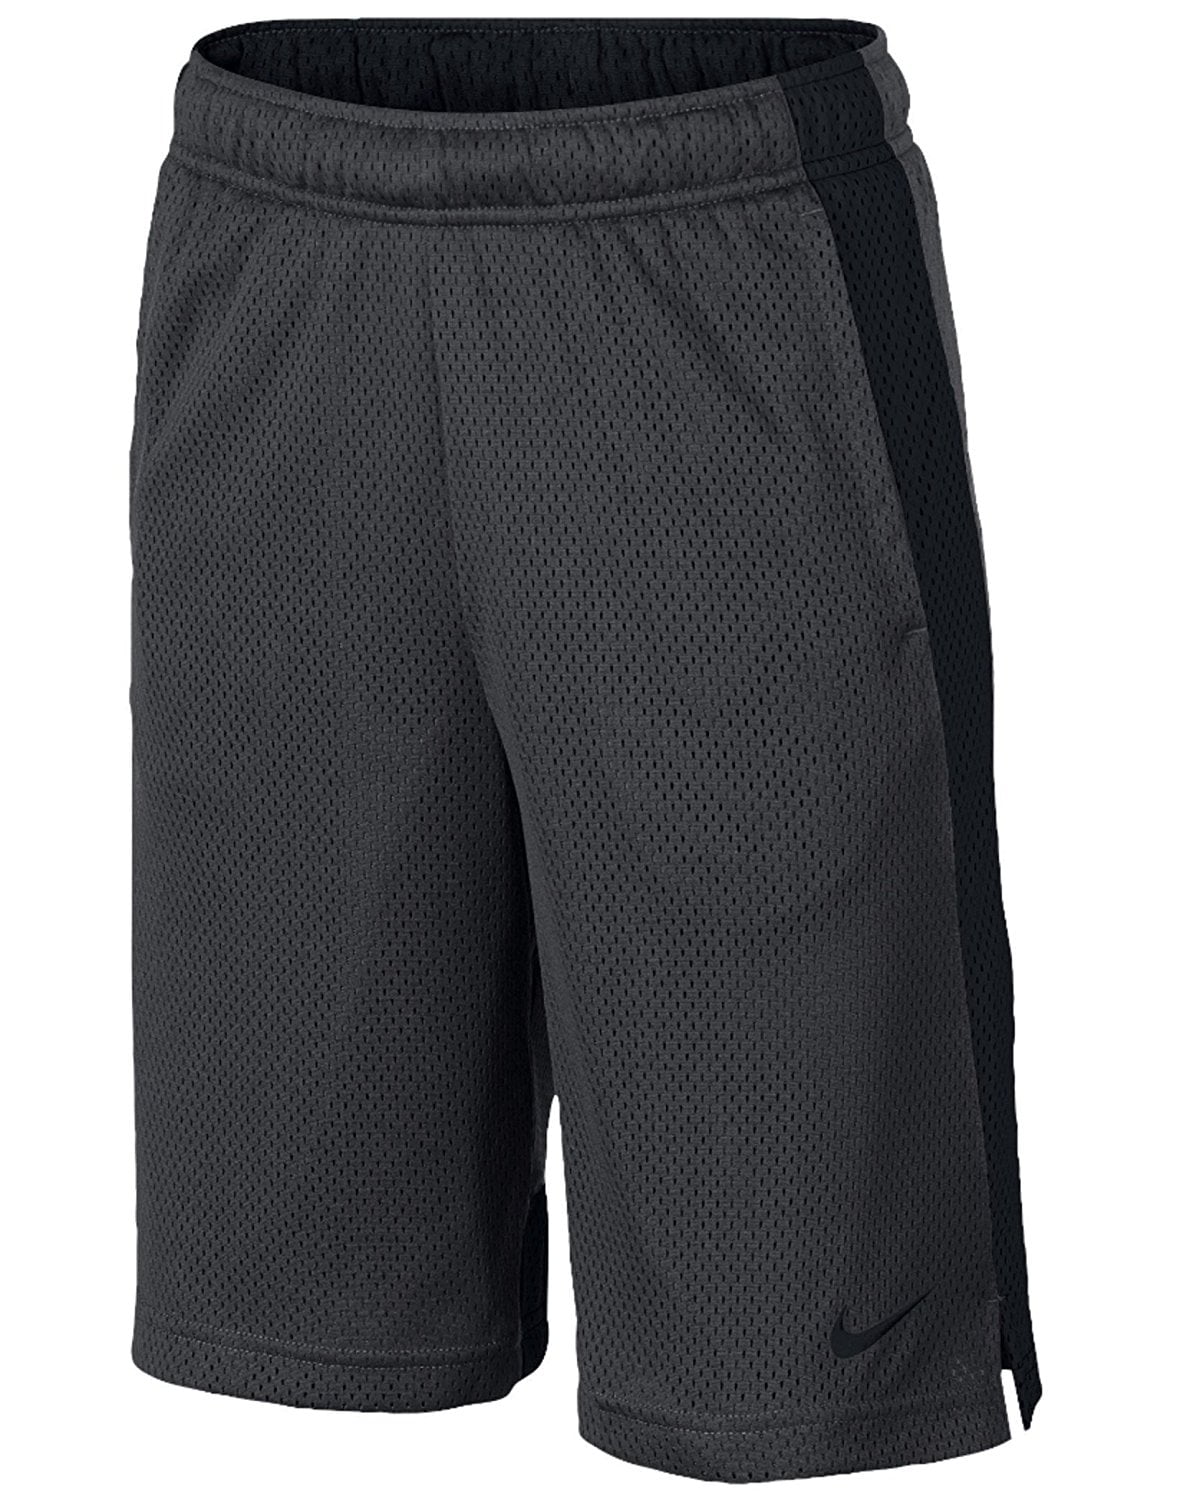 Nike Youth Boys Dri-Fit Monster Mesh Athletic Shorts, Anthracite/Black ...